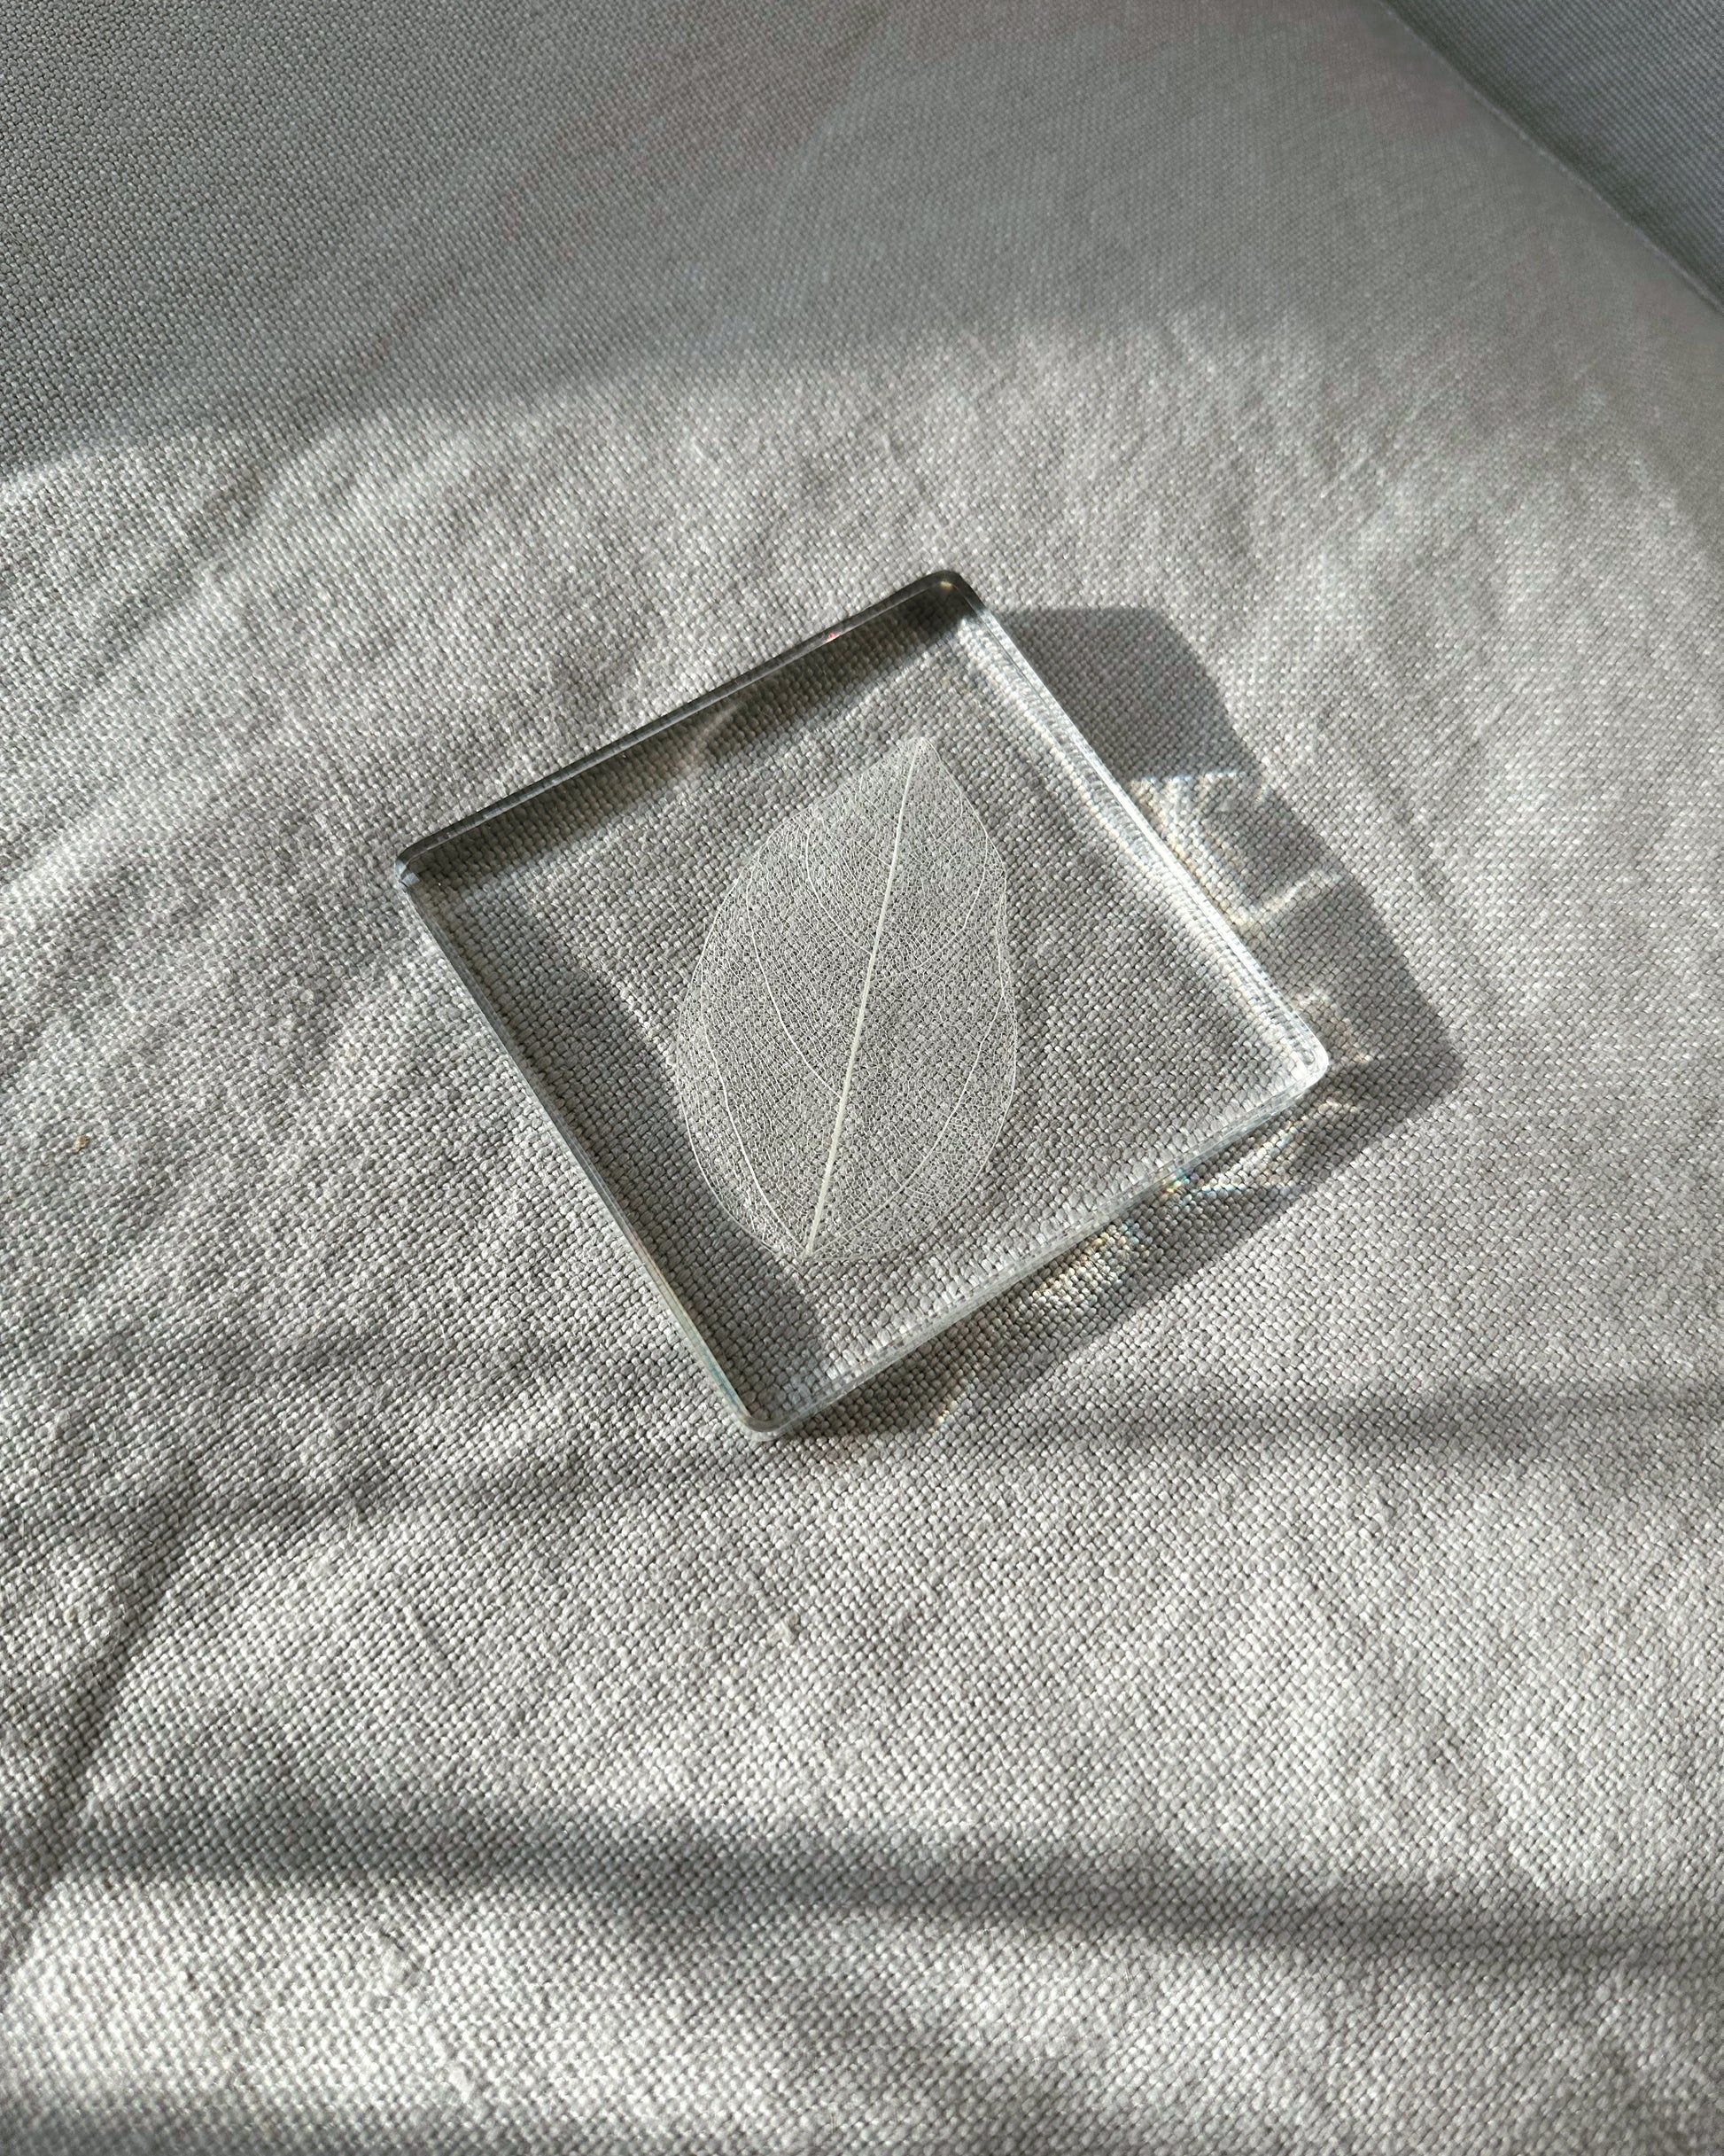 Magnolia leaves suspended in a resin square coaster